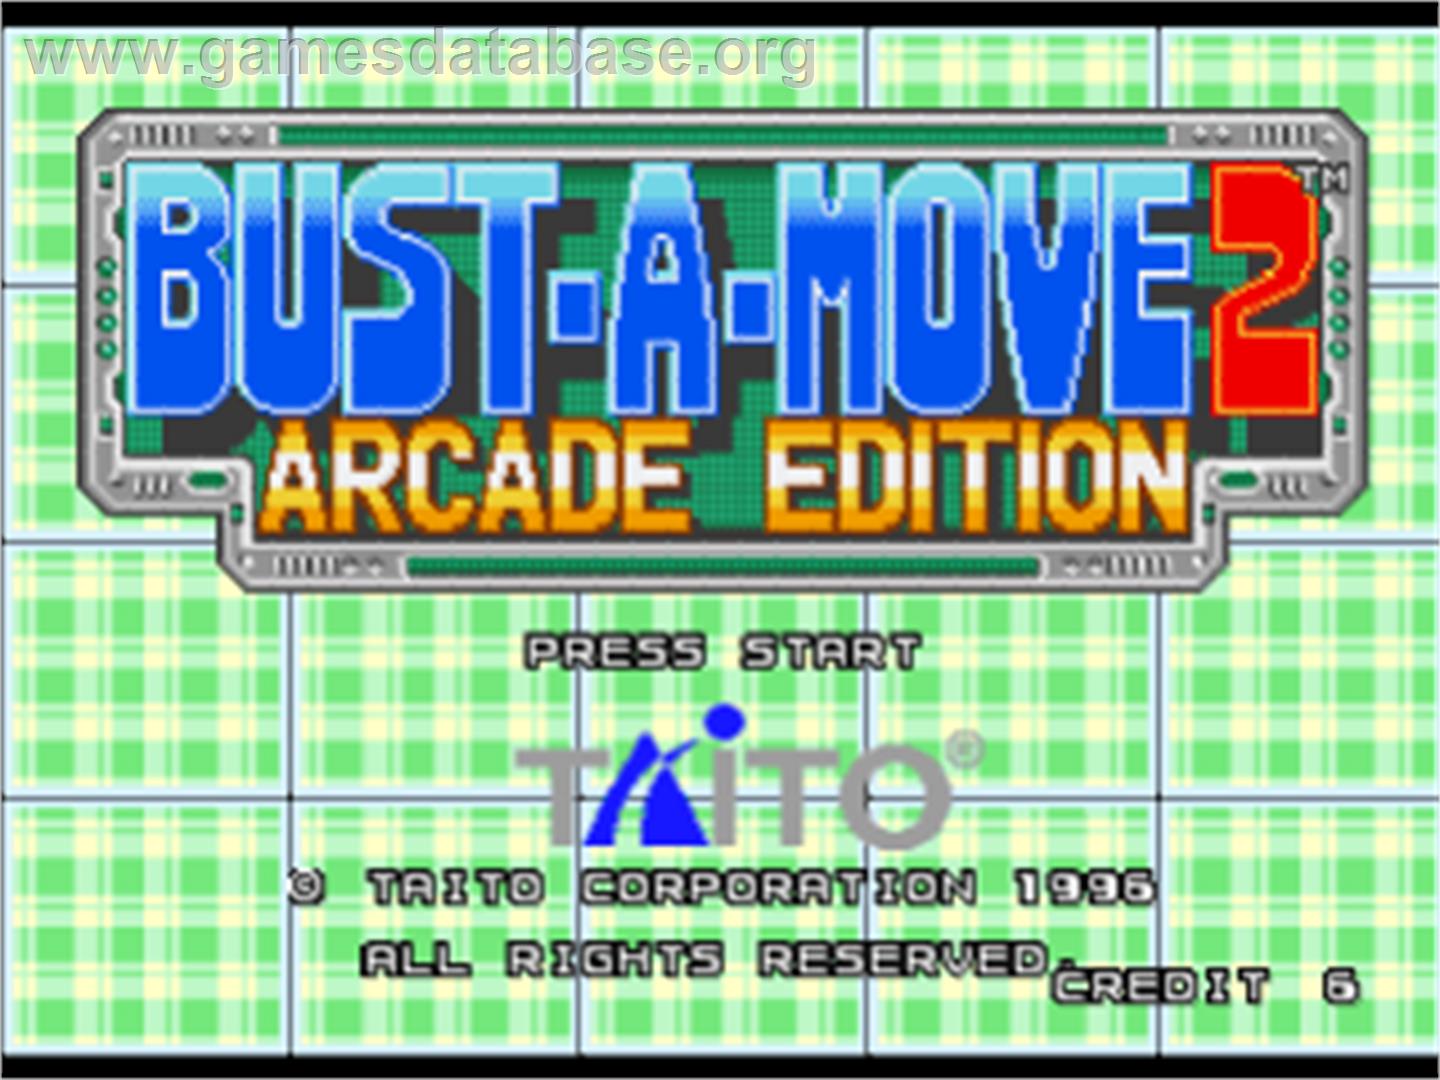 Bust-A-Move 2: Arcade Edition - Sony Playstation - Artwork - Title Screen